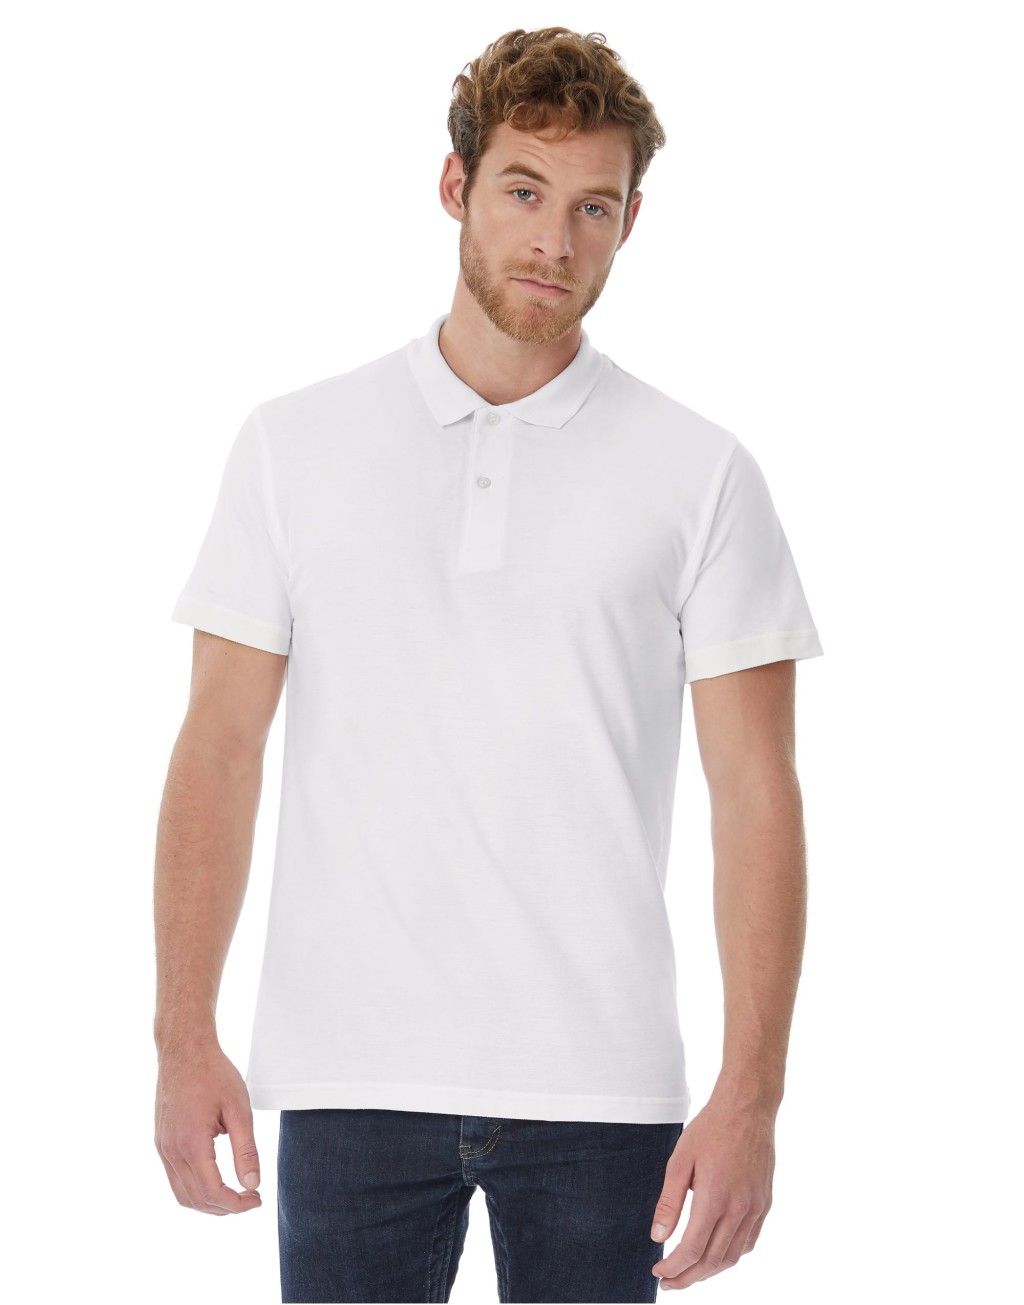 Polos | Absolute Workwear